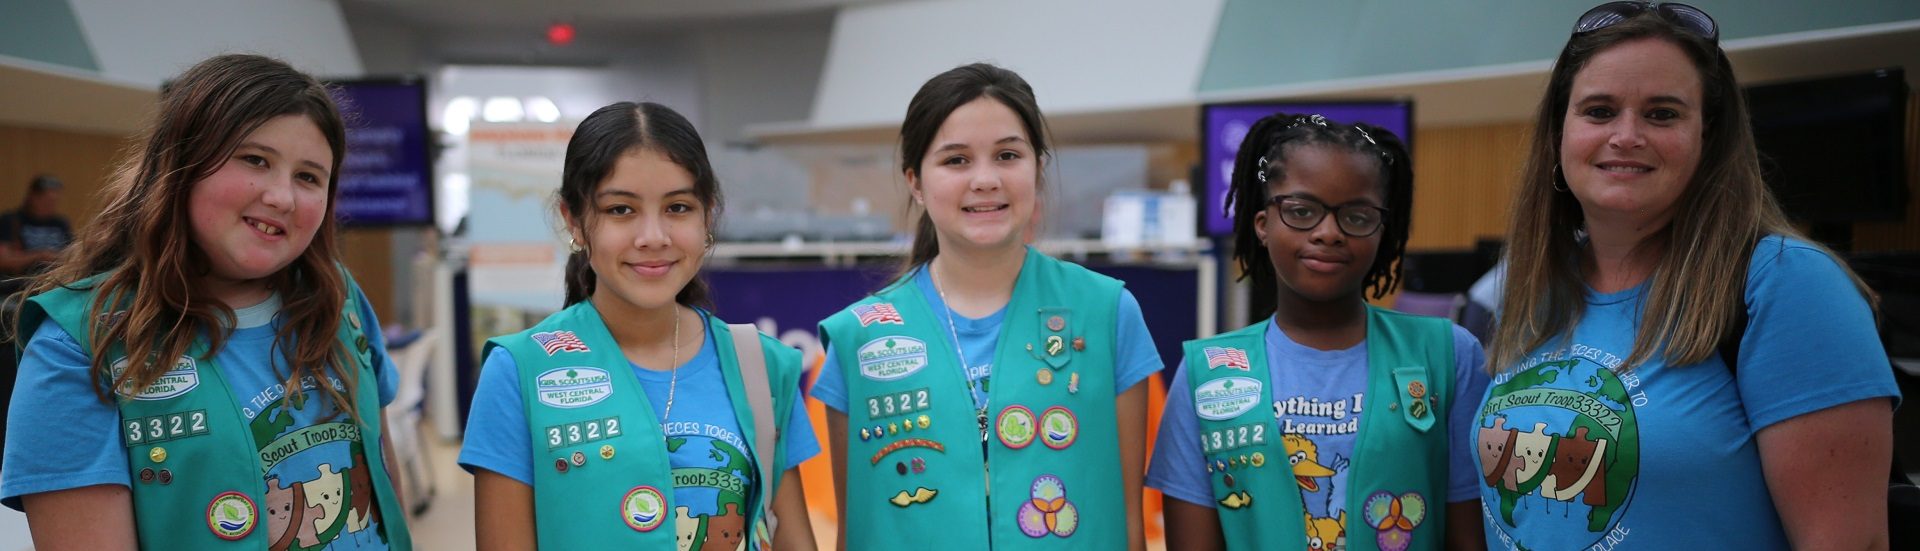  three young girl scouts with their arms wrapped around one another and smiling at the camera 